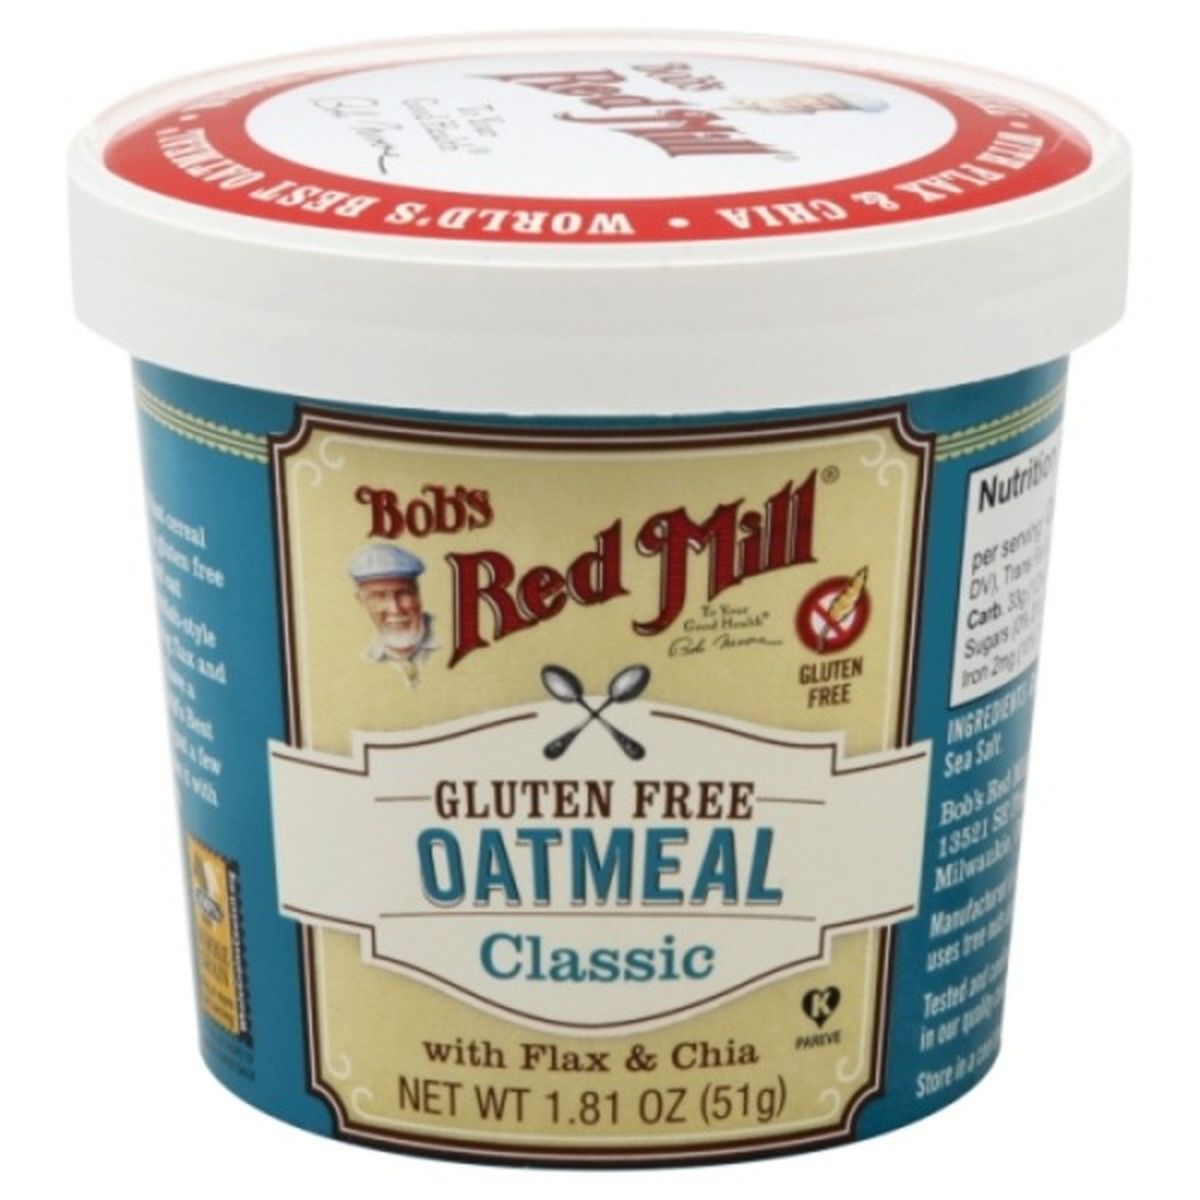 Calories in Bob's Red Mill Oatmeal, Gluten Free, Classic